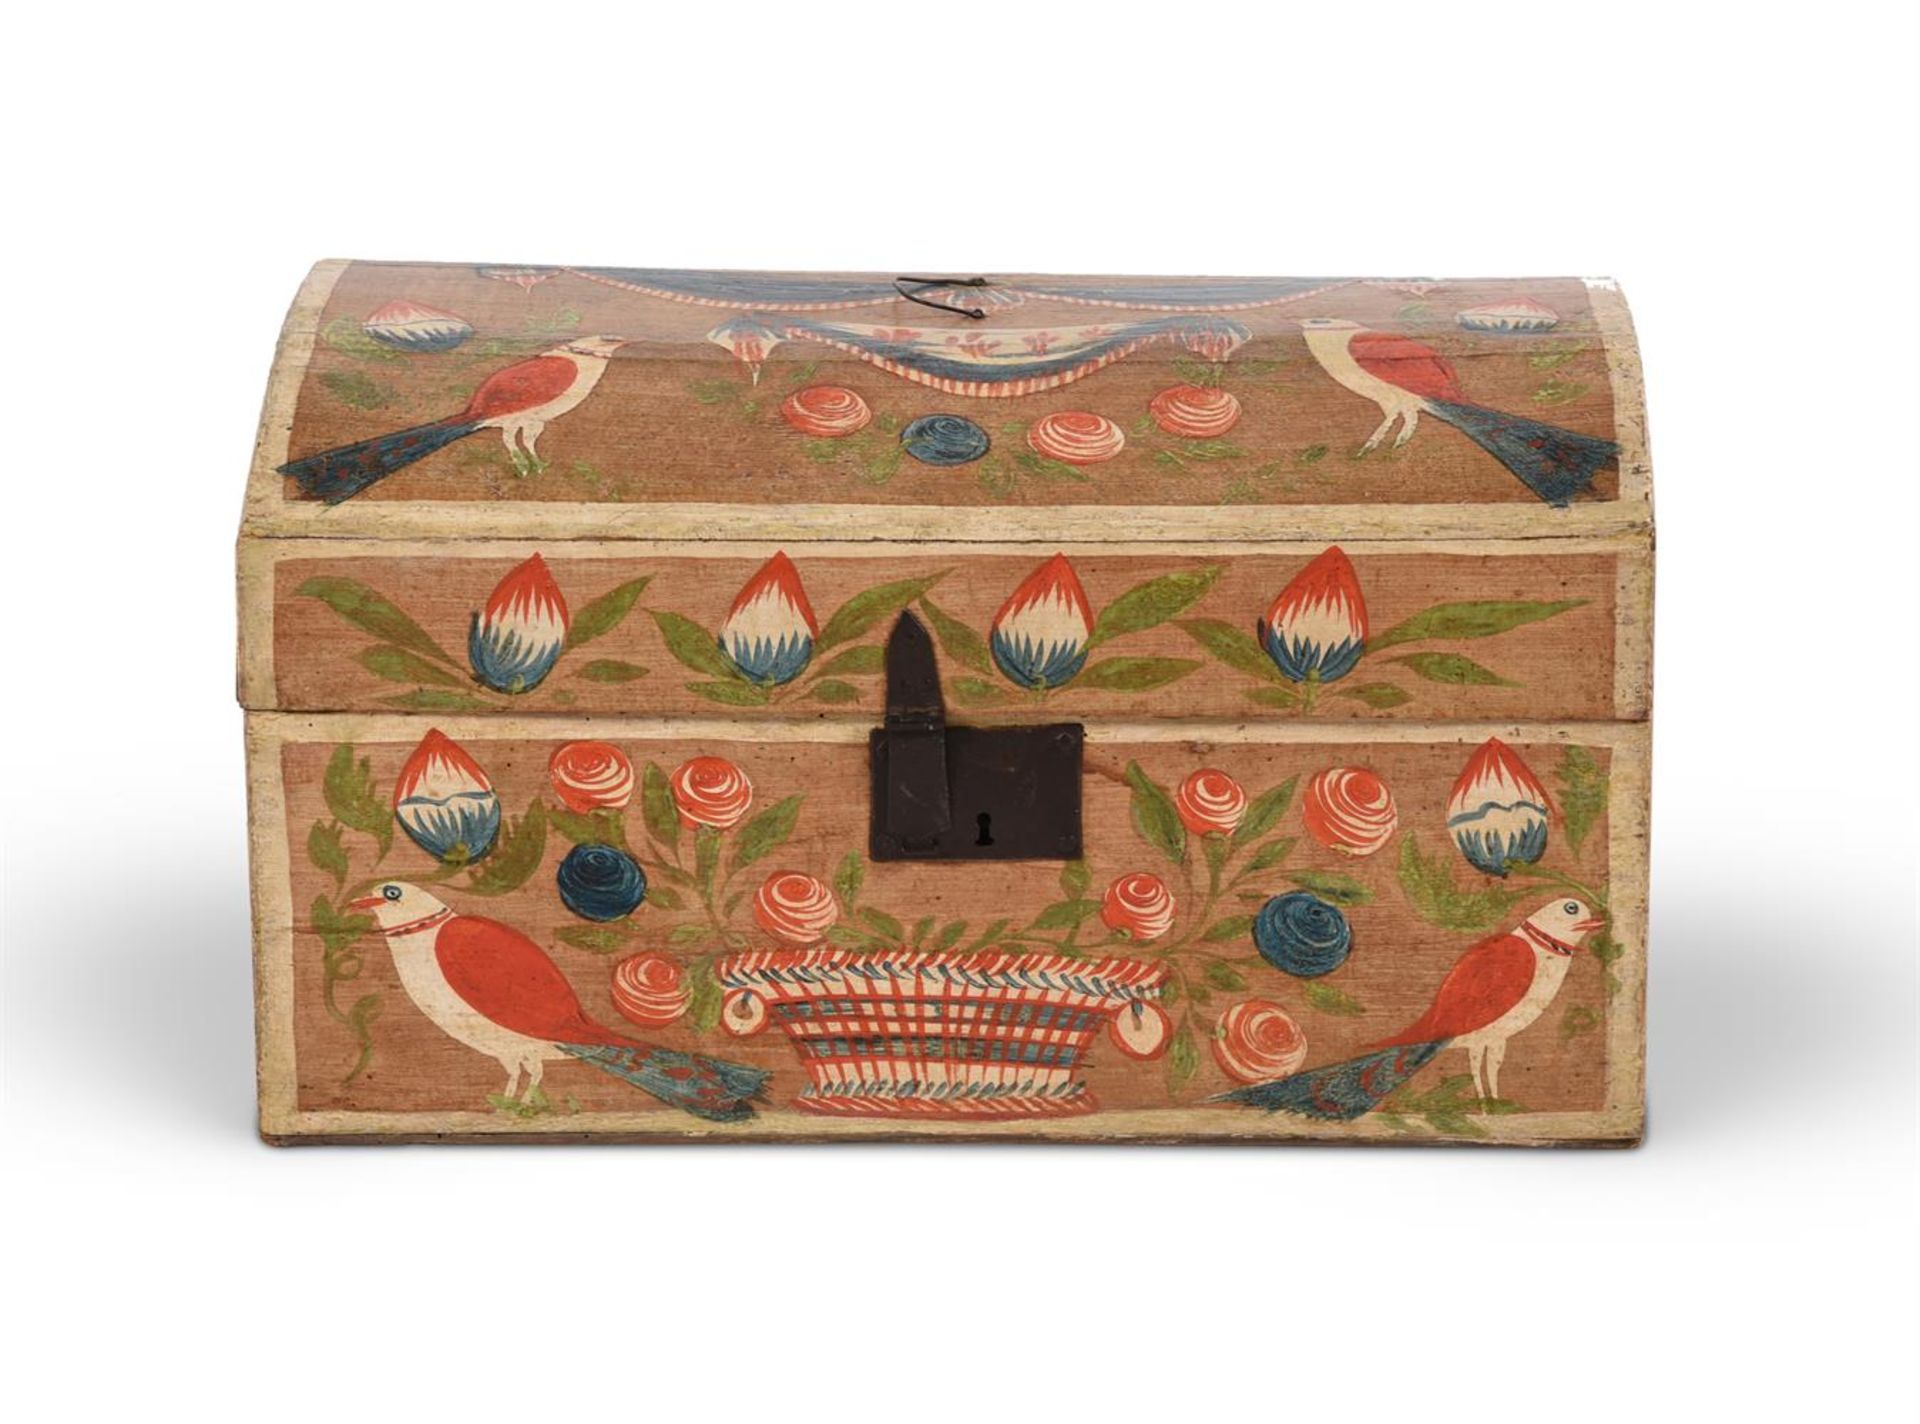 A FRENCH POLYCHROME PAINTED POPLAR MARRIAGE CHEST, LATE 18TH OR EARLY 19TH CENTURY